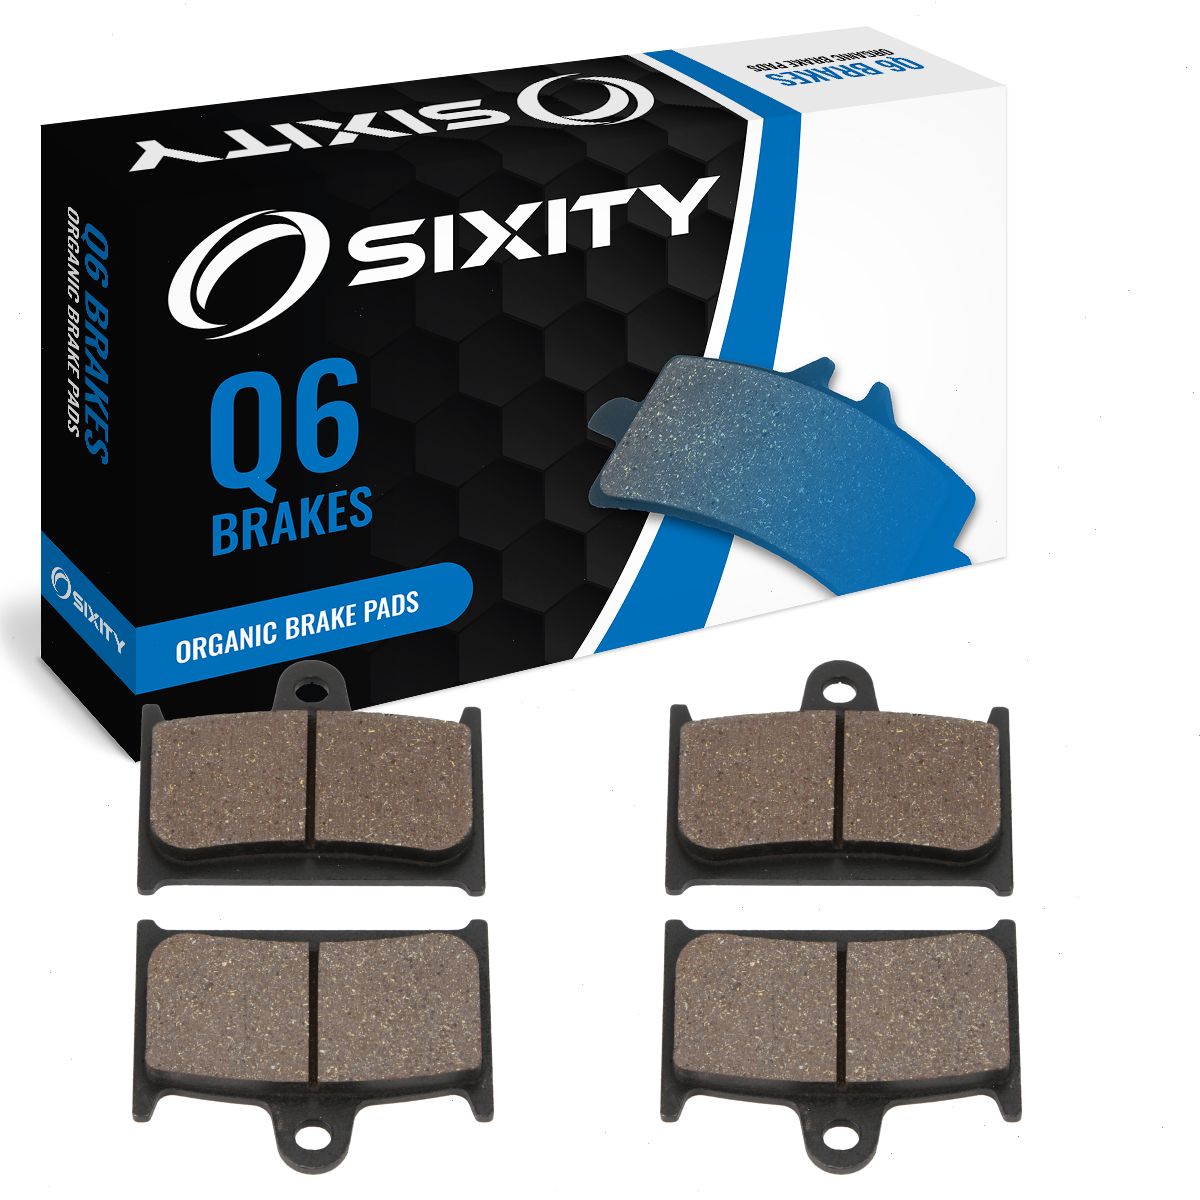 sixity products